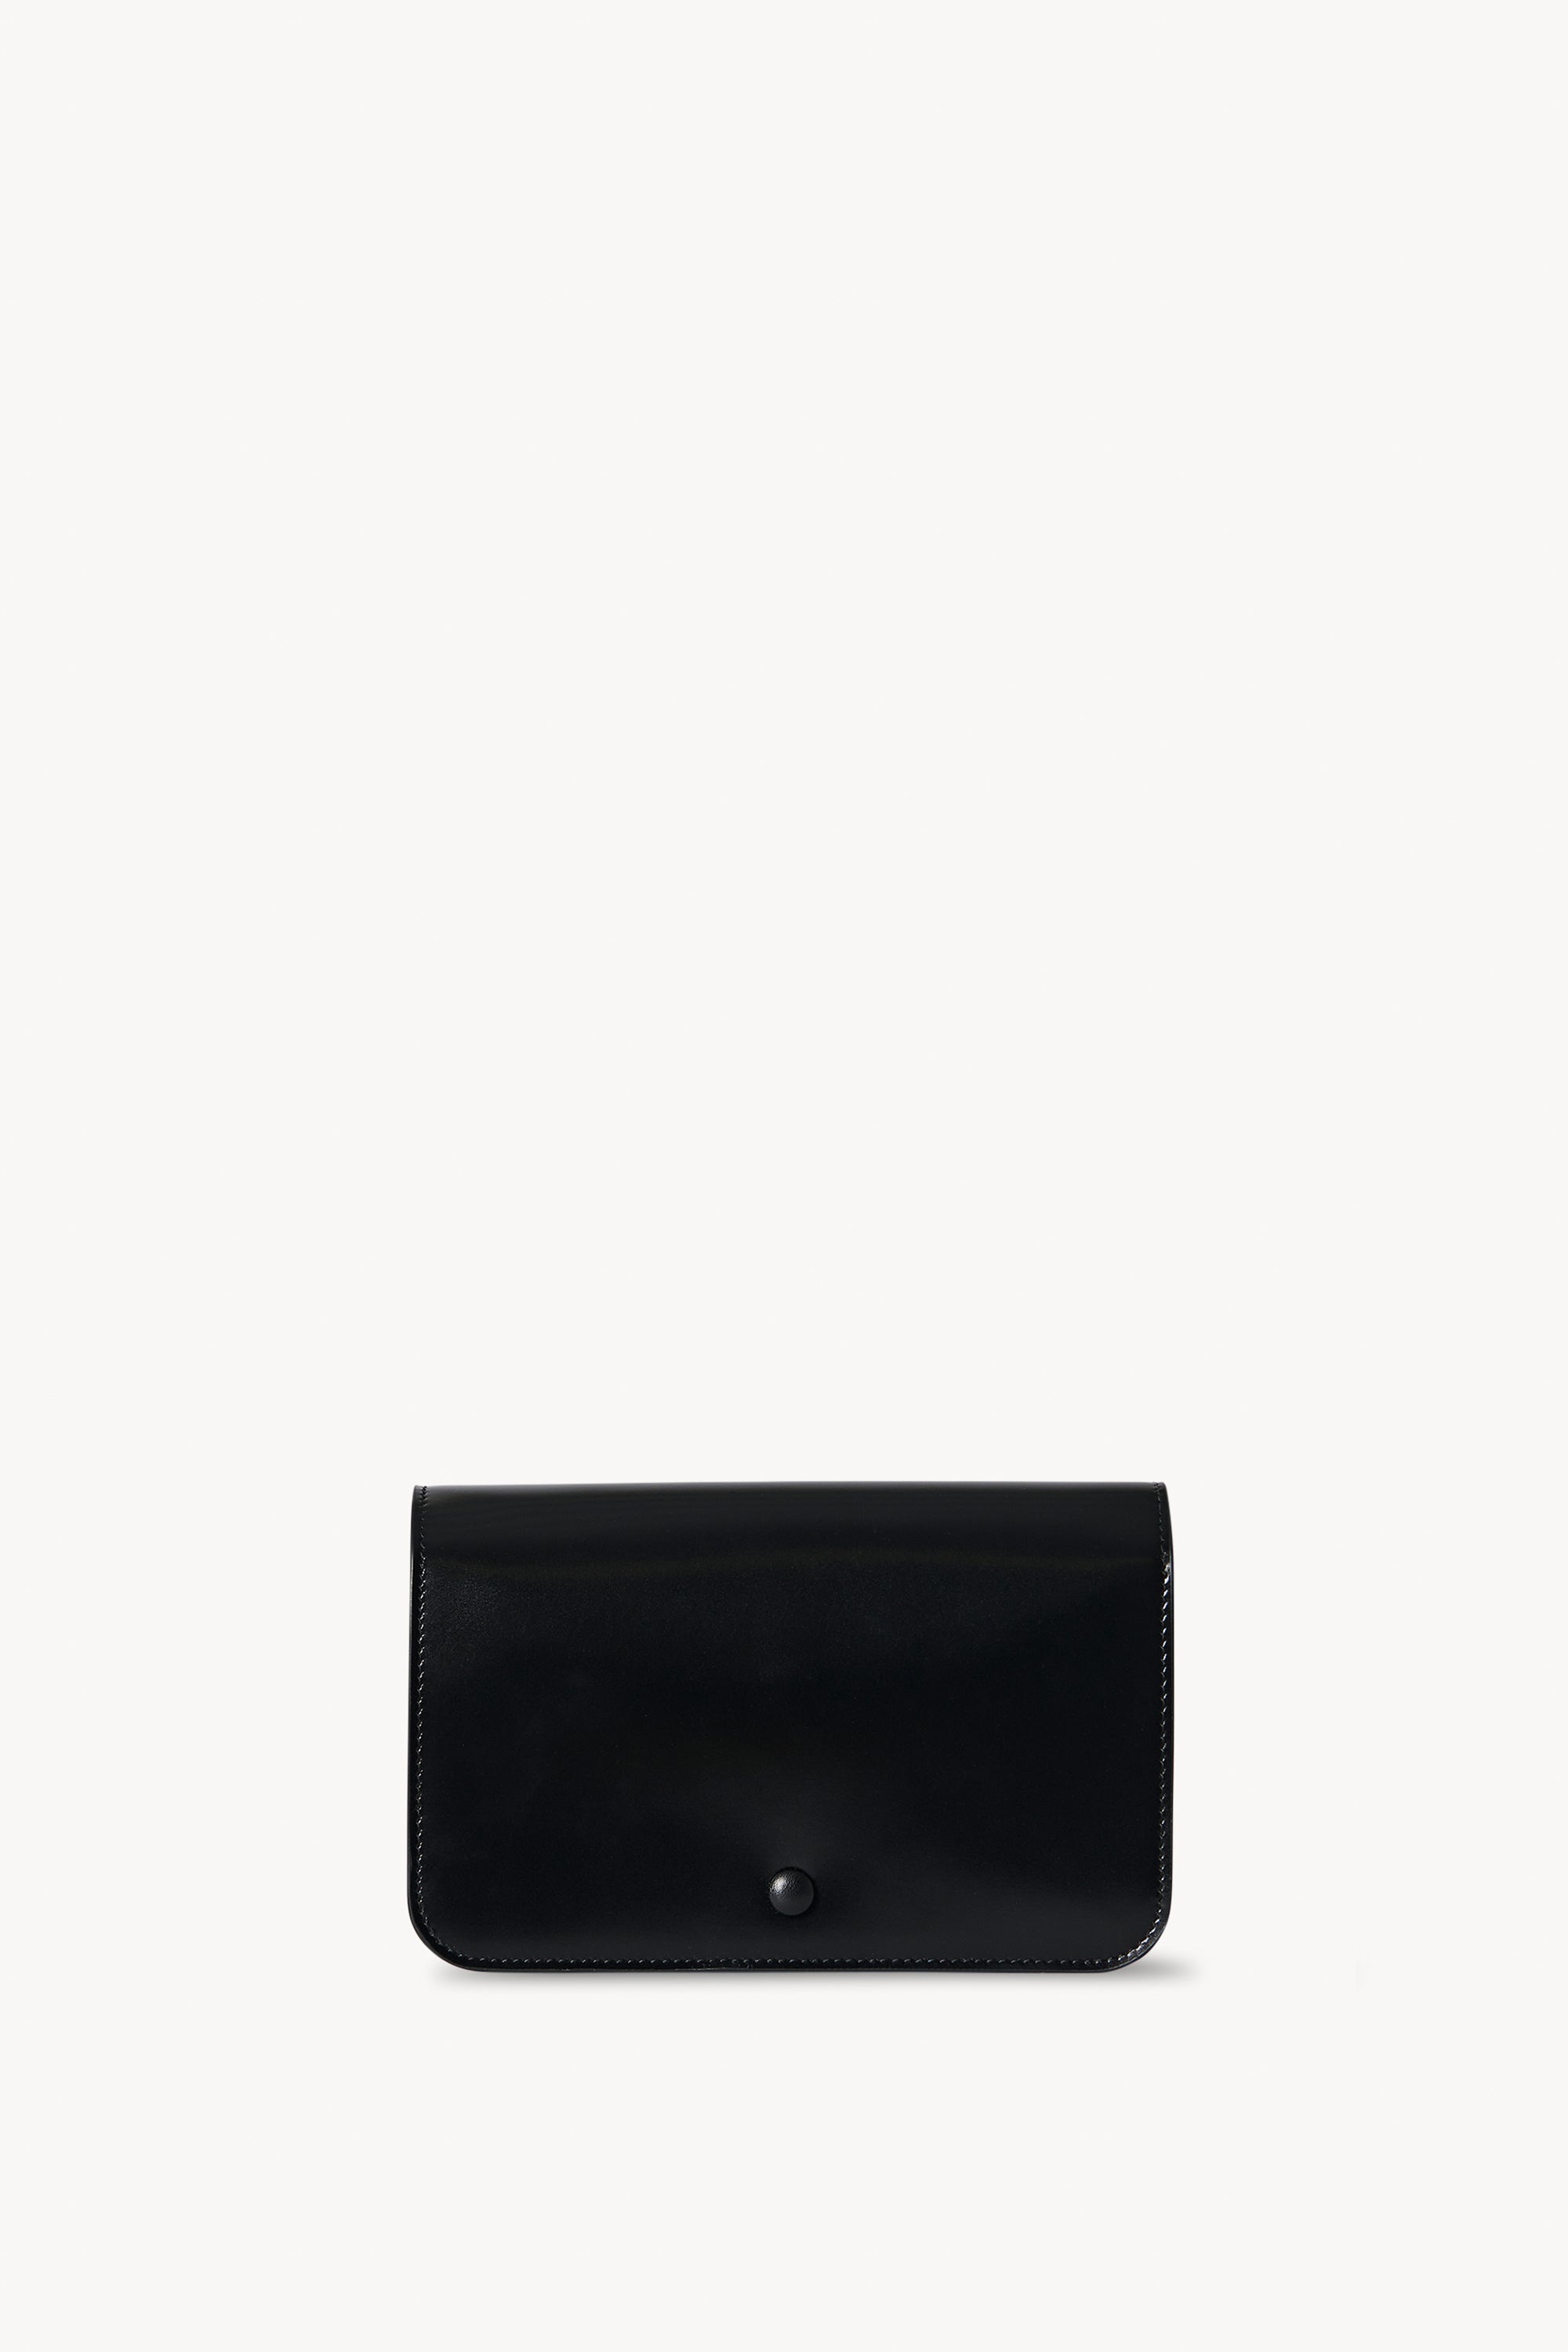 Multi Gusset Clutch in Leather - 1